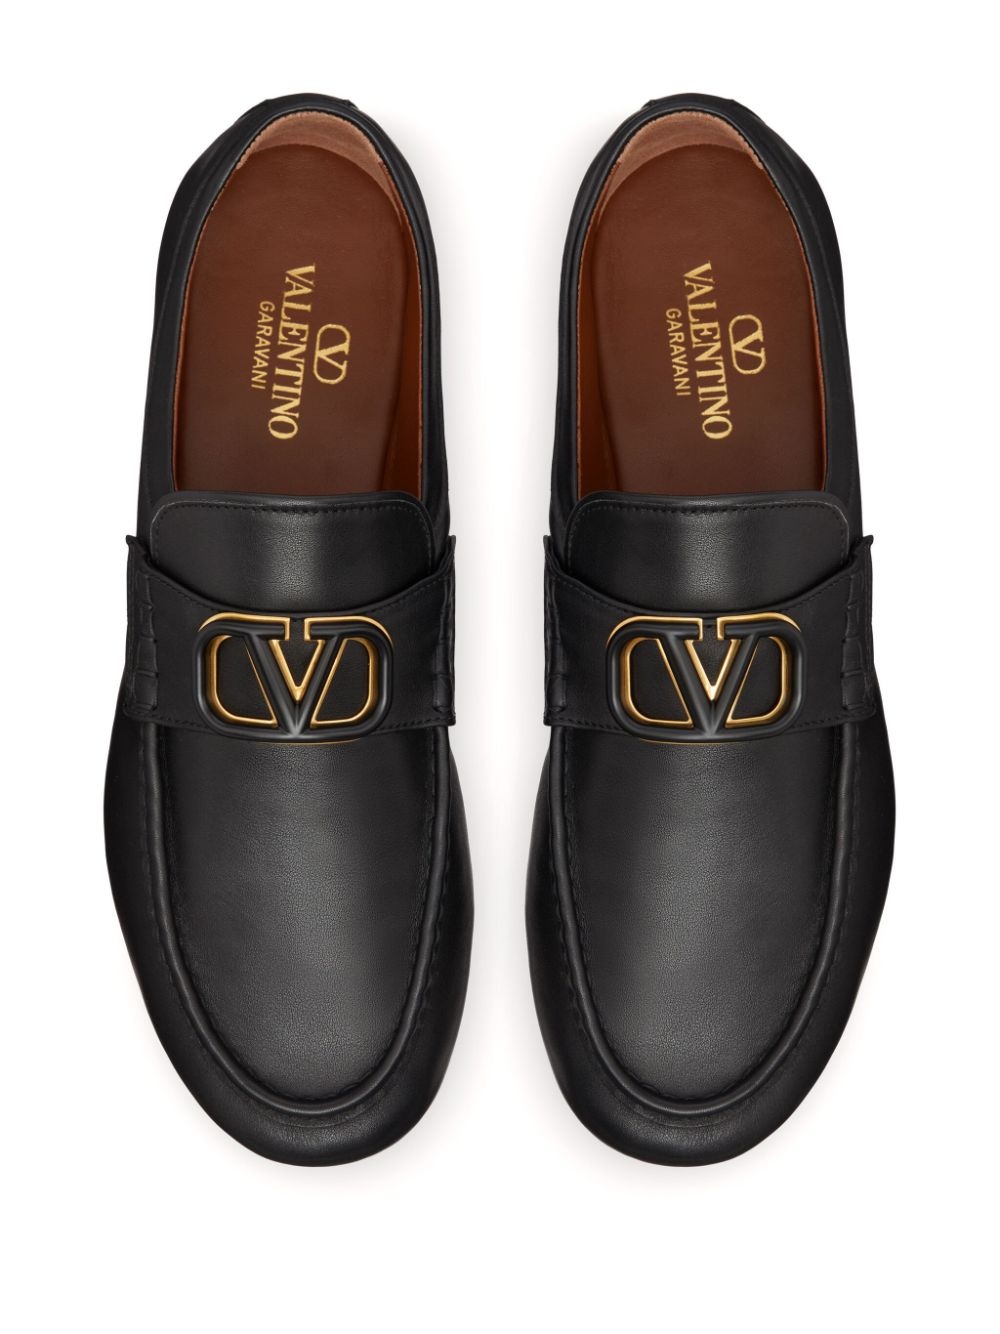 VLogo Signature leather loafers - 4